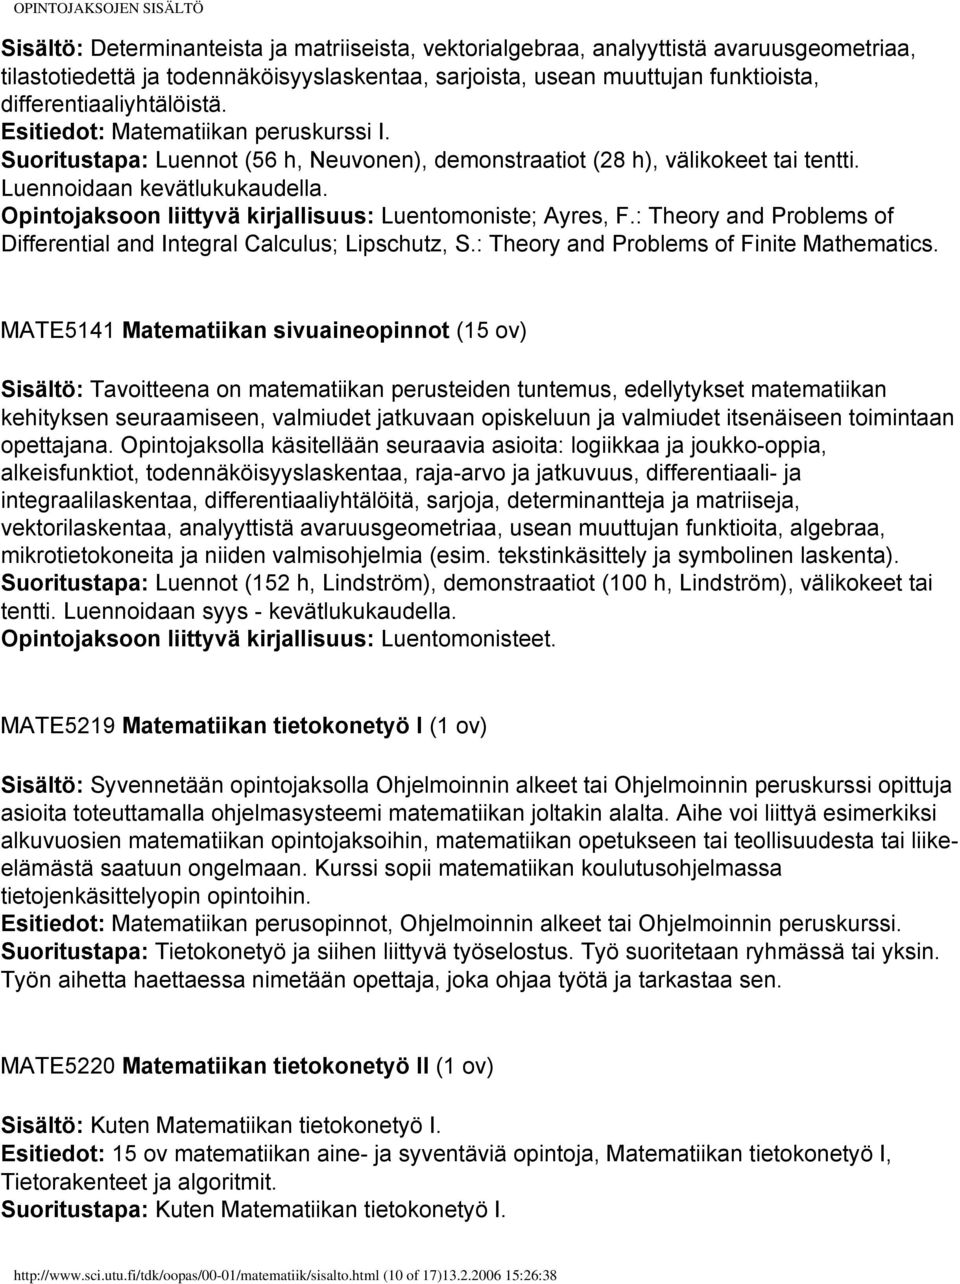 Opintojaksoon liittyvä kirjallisuus: Luentomoniste; Ayres, F.: Theory and Problems of Differential and Integral Calculus; Lipschutz, S.: Theory and Problems of Finite Mathematics.